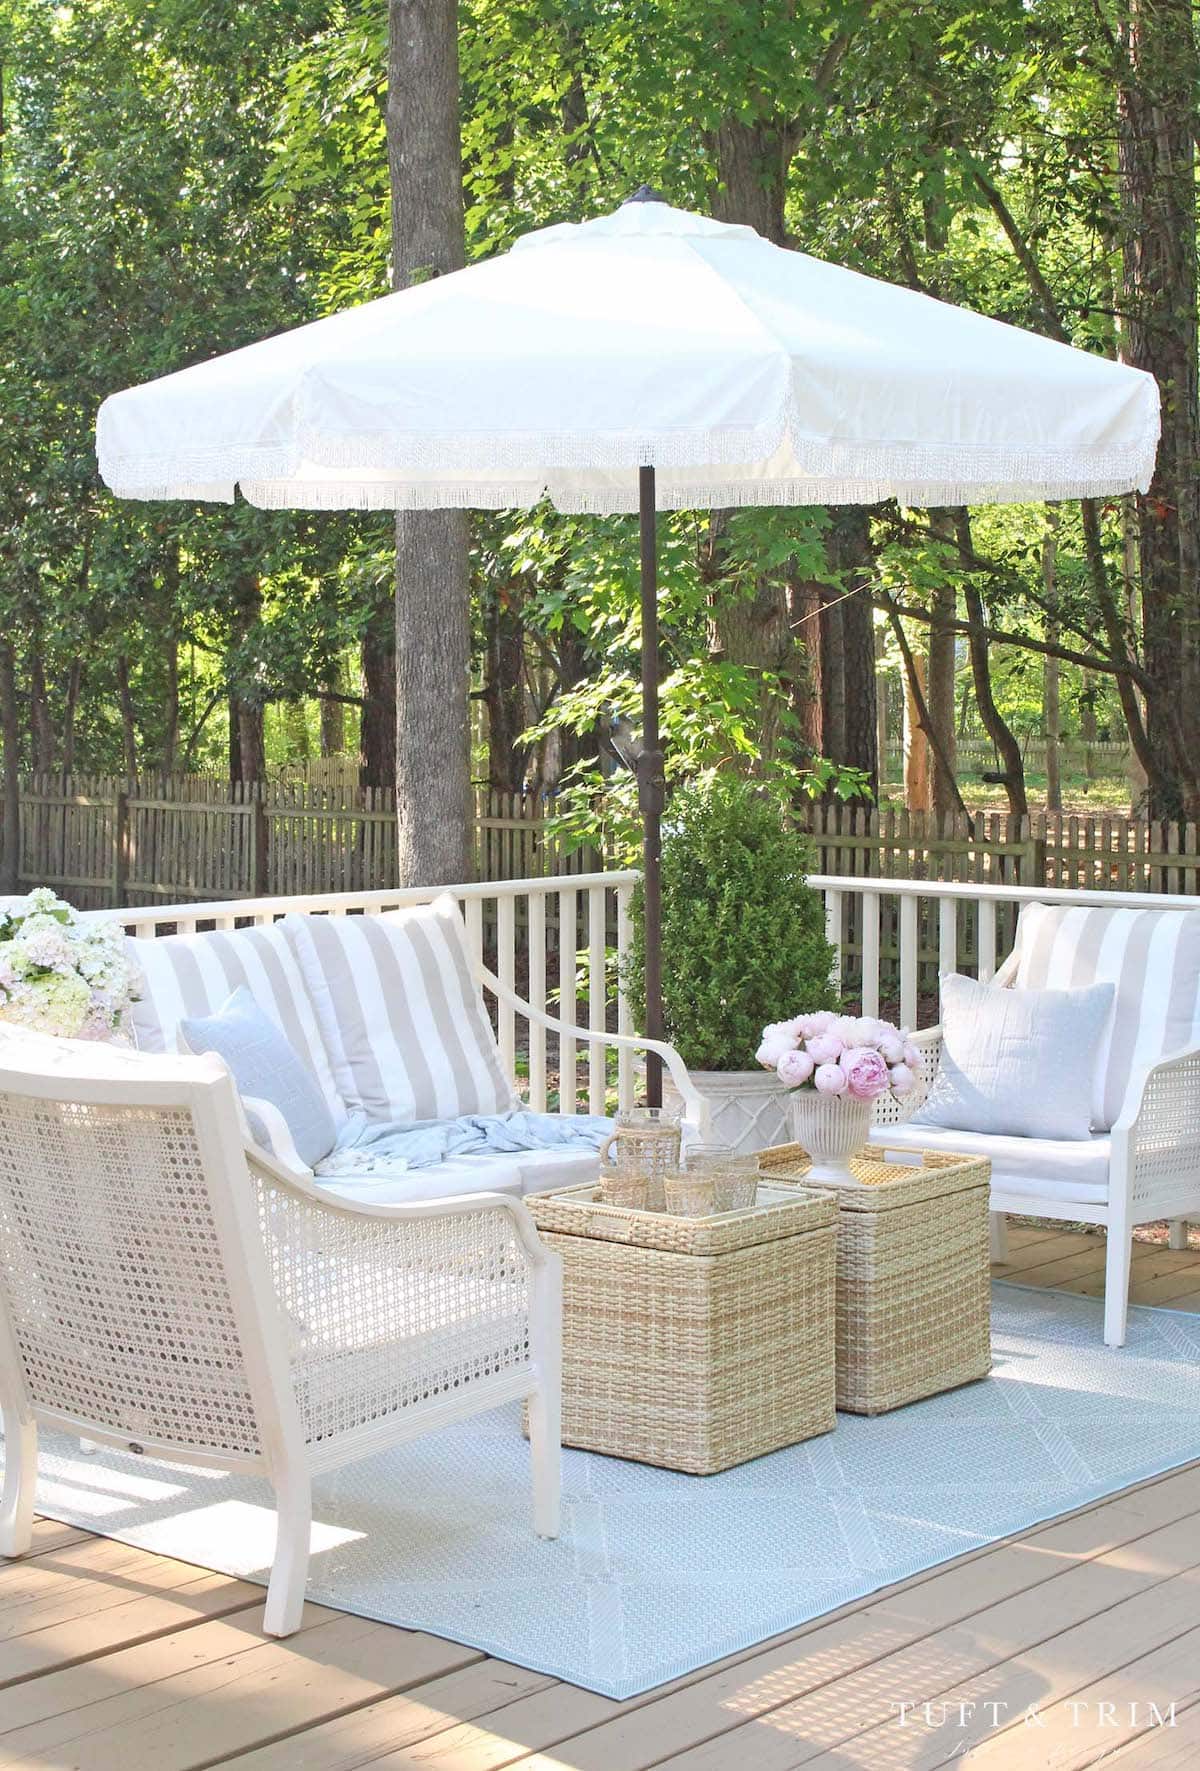 French country style house deck patio